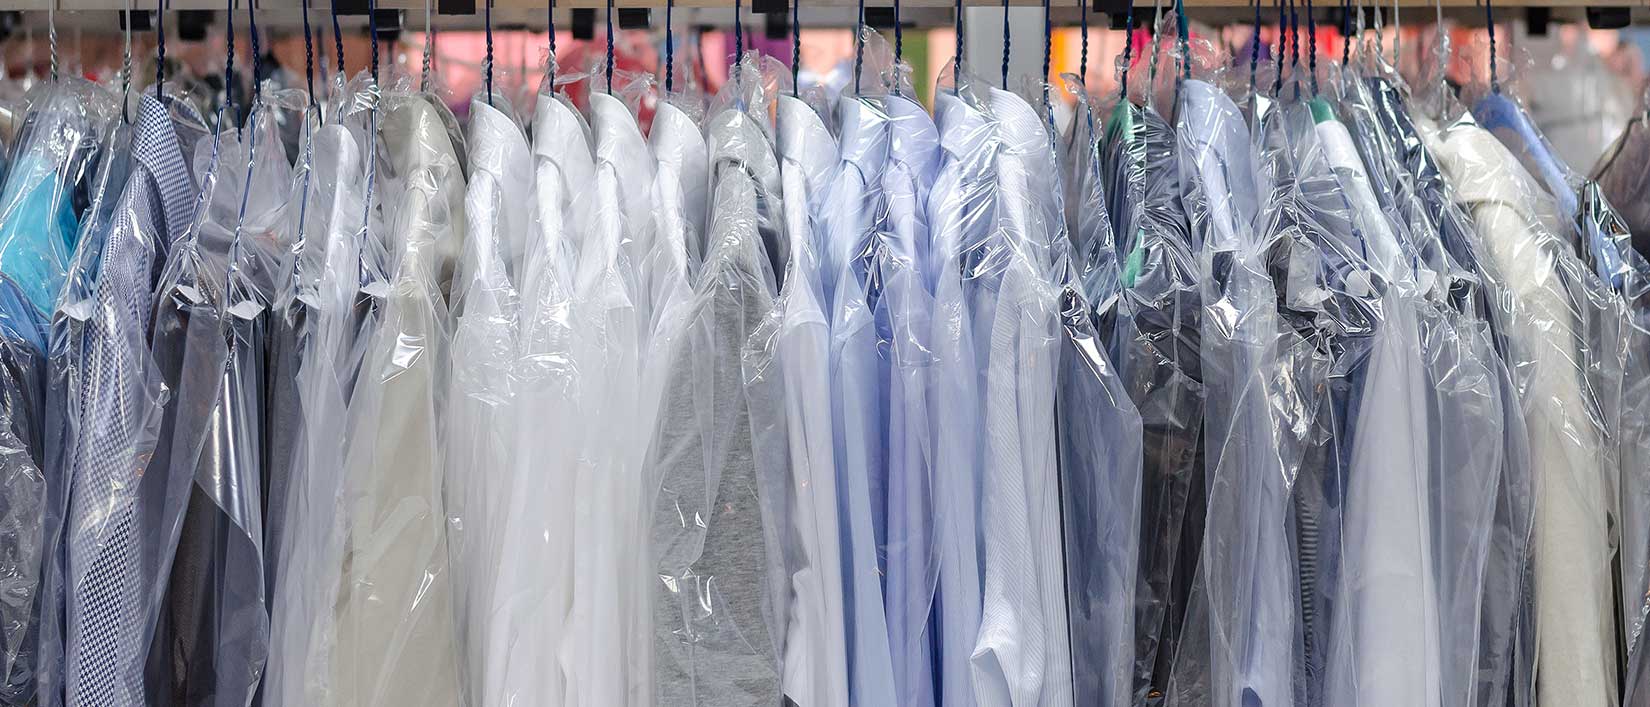 Dry Cleaner Services in Lexington and Weston, MA